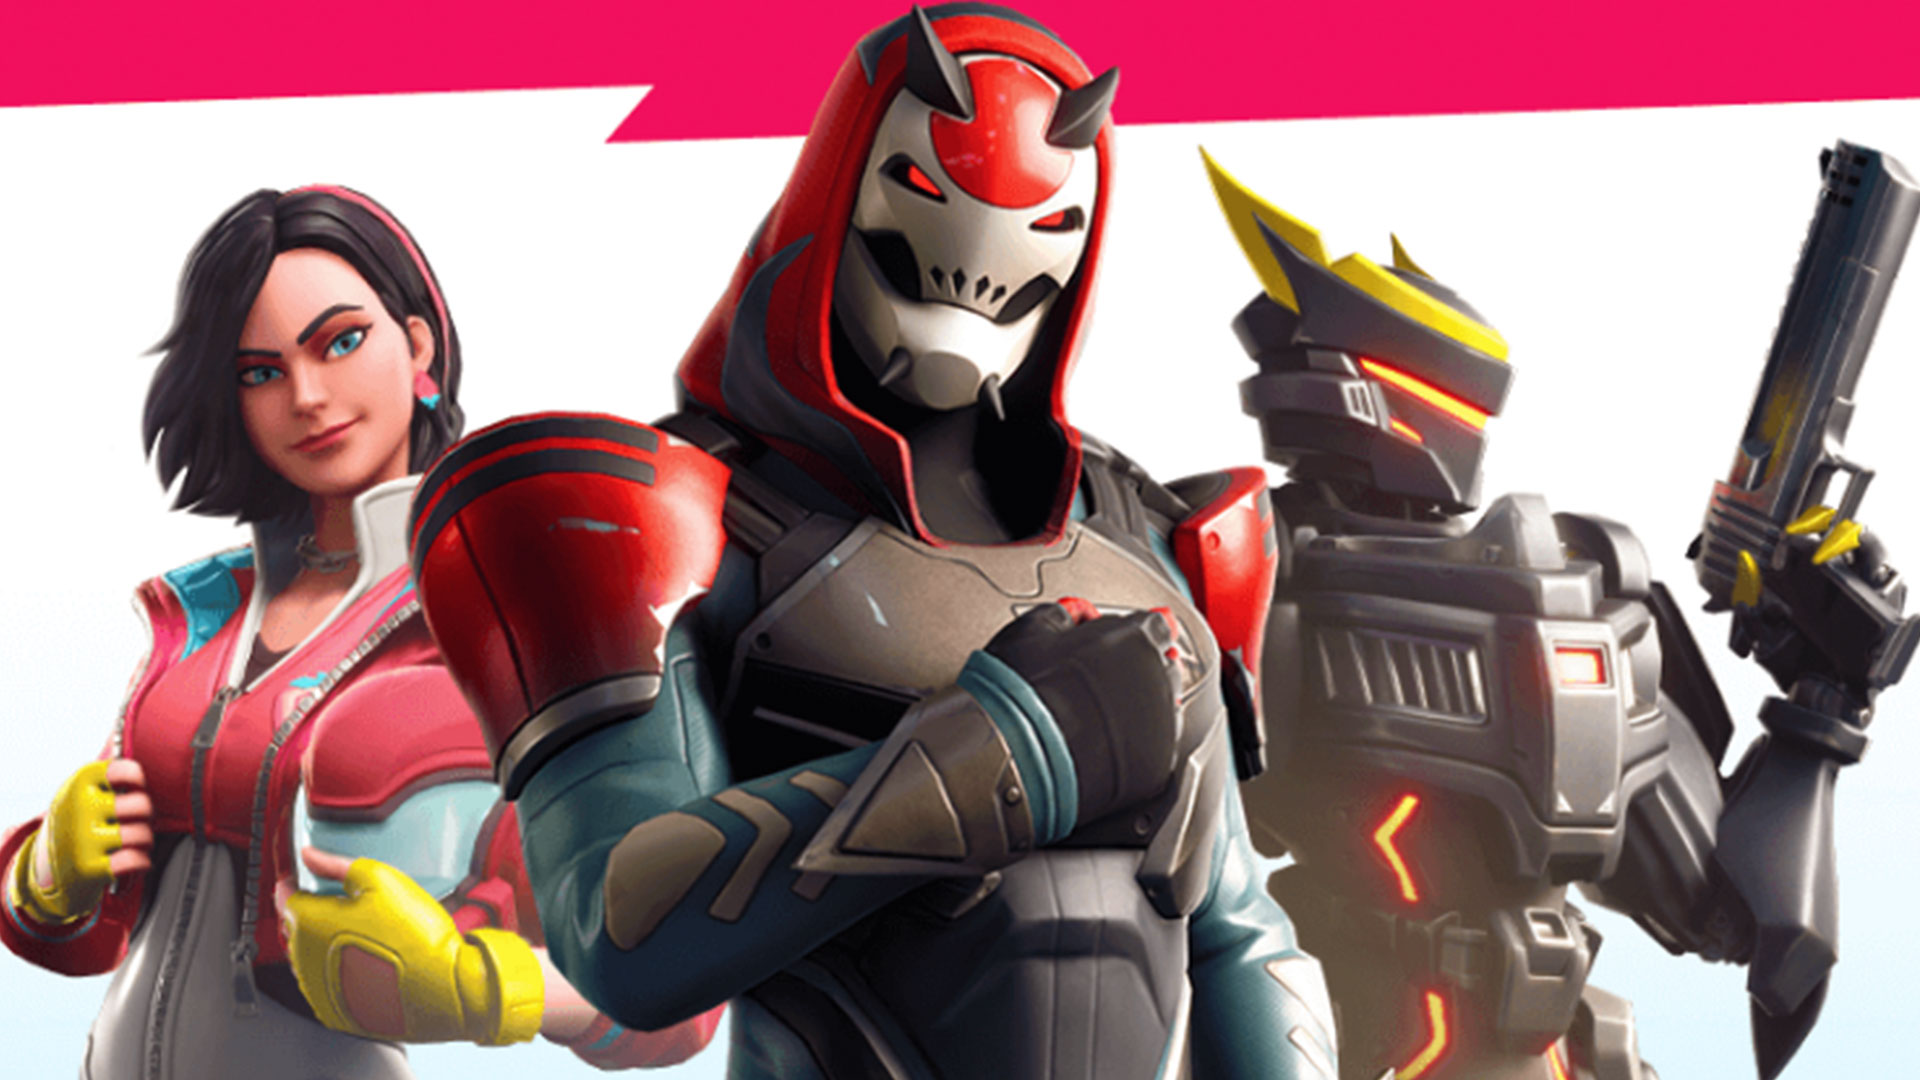 15 games like fortnite that you can switch to during those dreaded downtimes gamesradar - fortnite mini characters